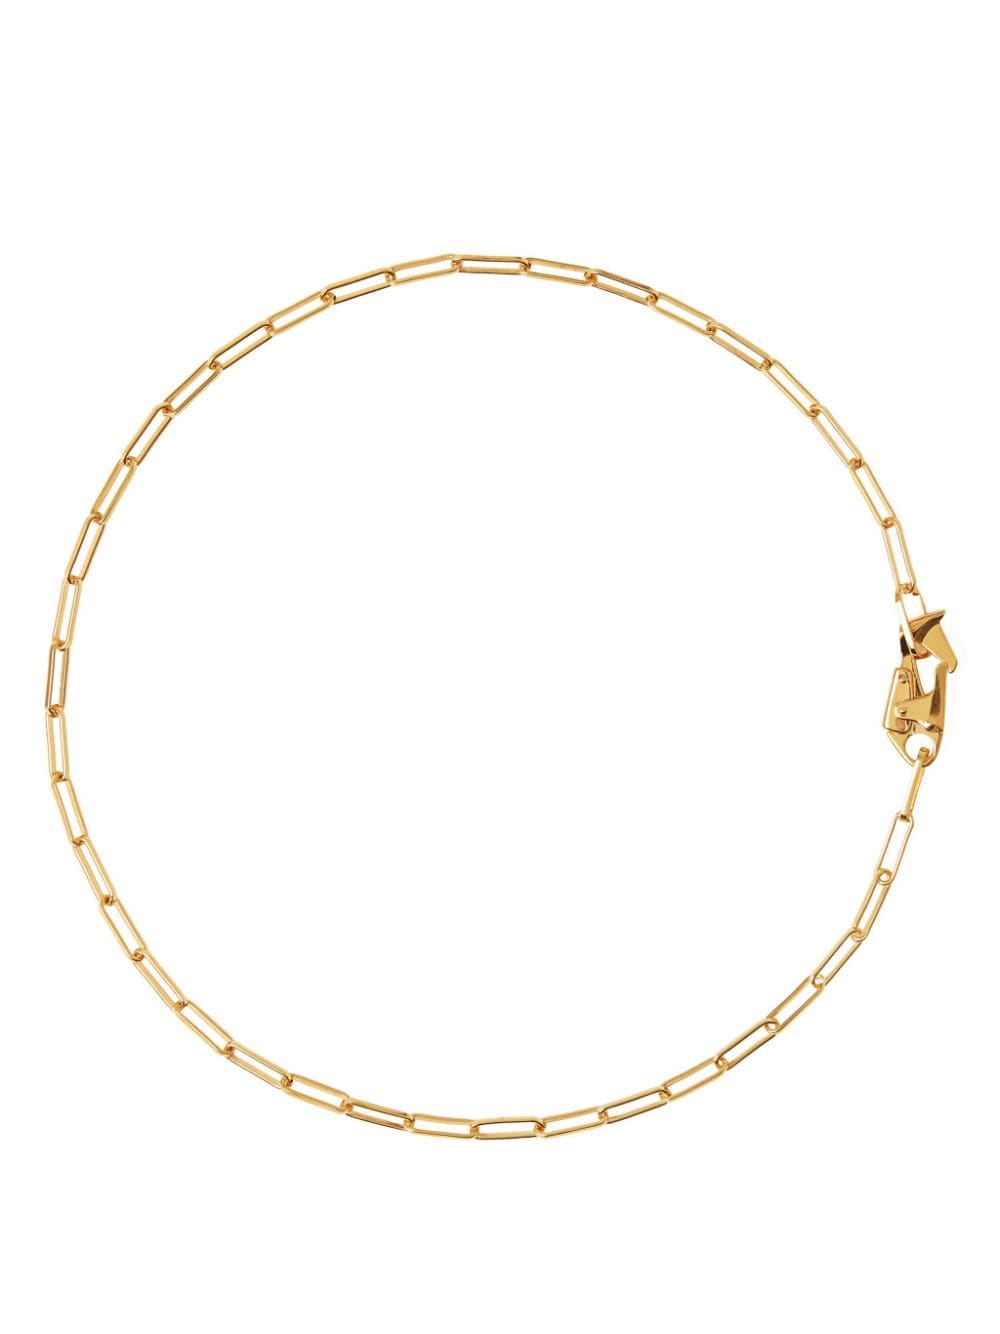 Burberry Horse gold-plated necklace von Burberry